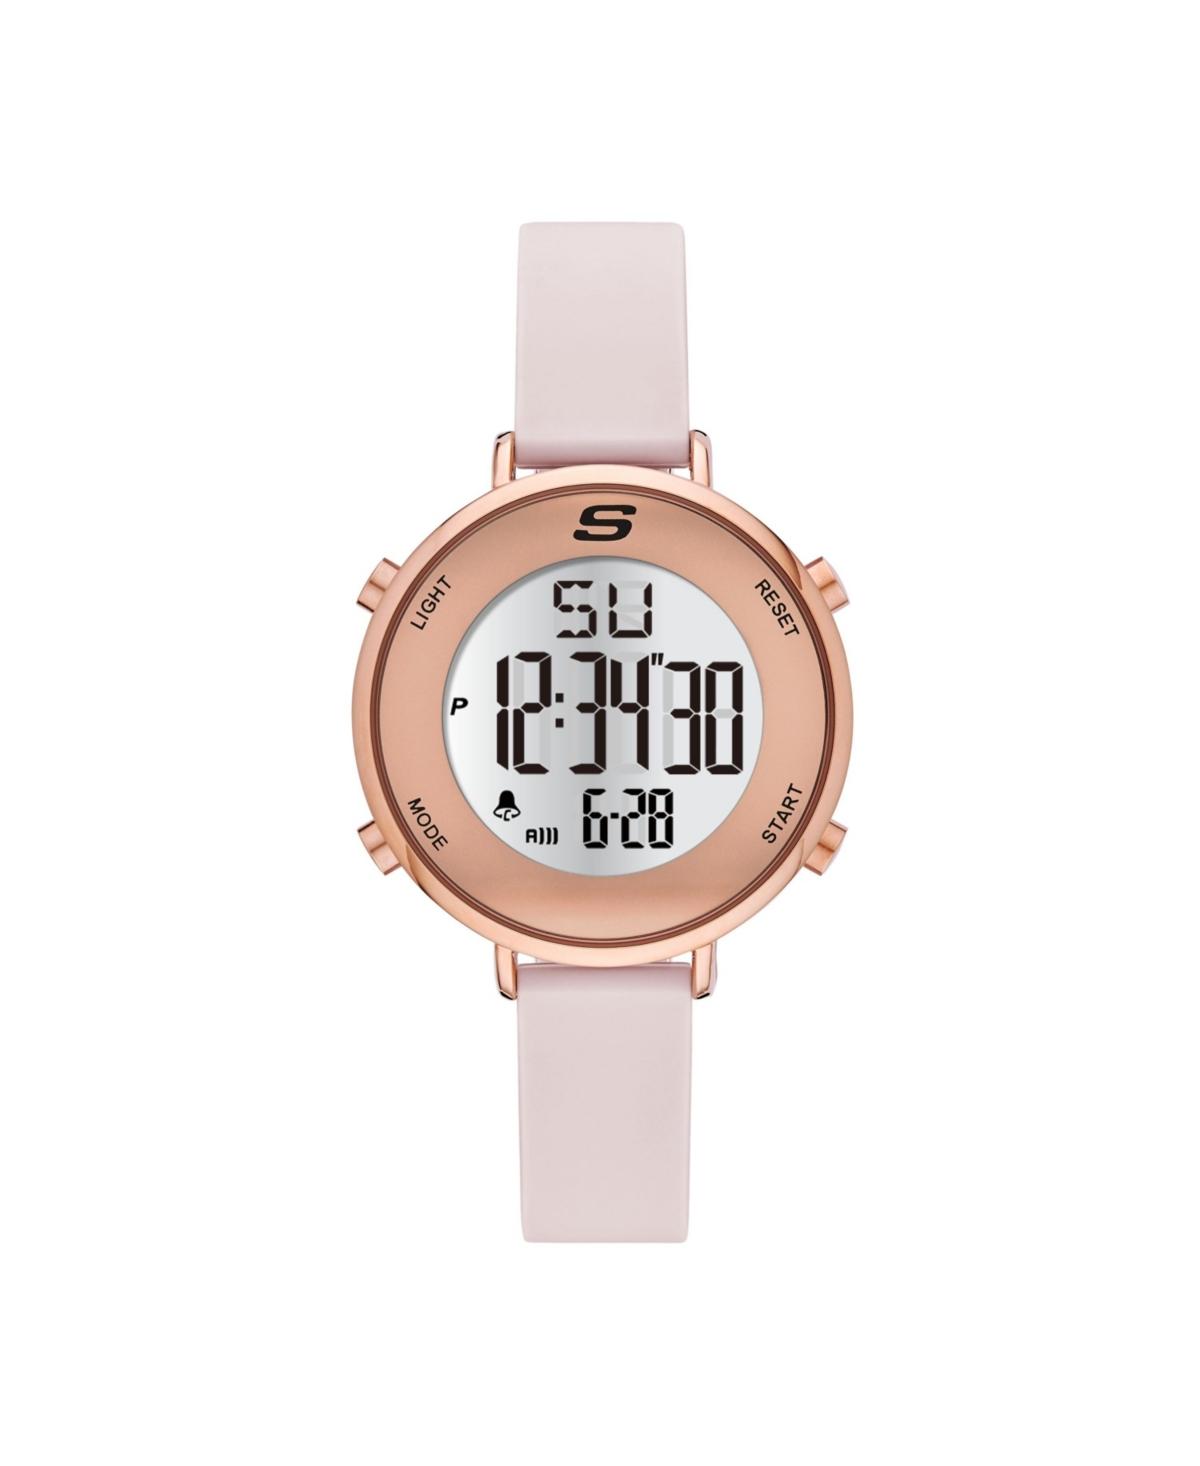 Skechers Magnolia 40mm Digital Chronograph Watch Pink in White | Lyst